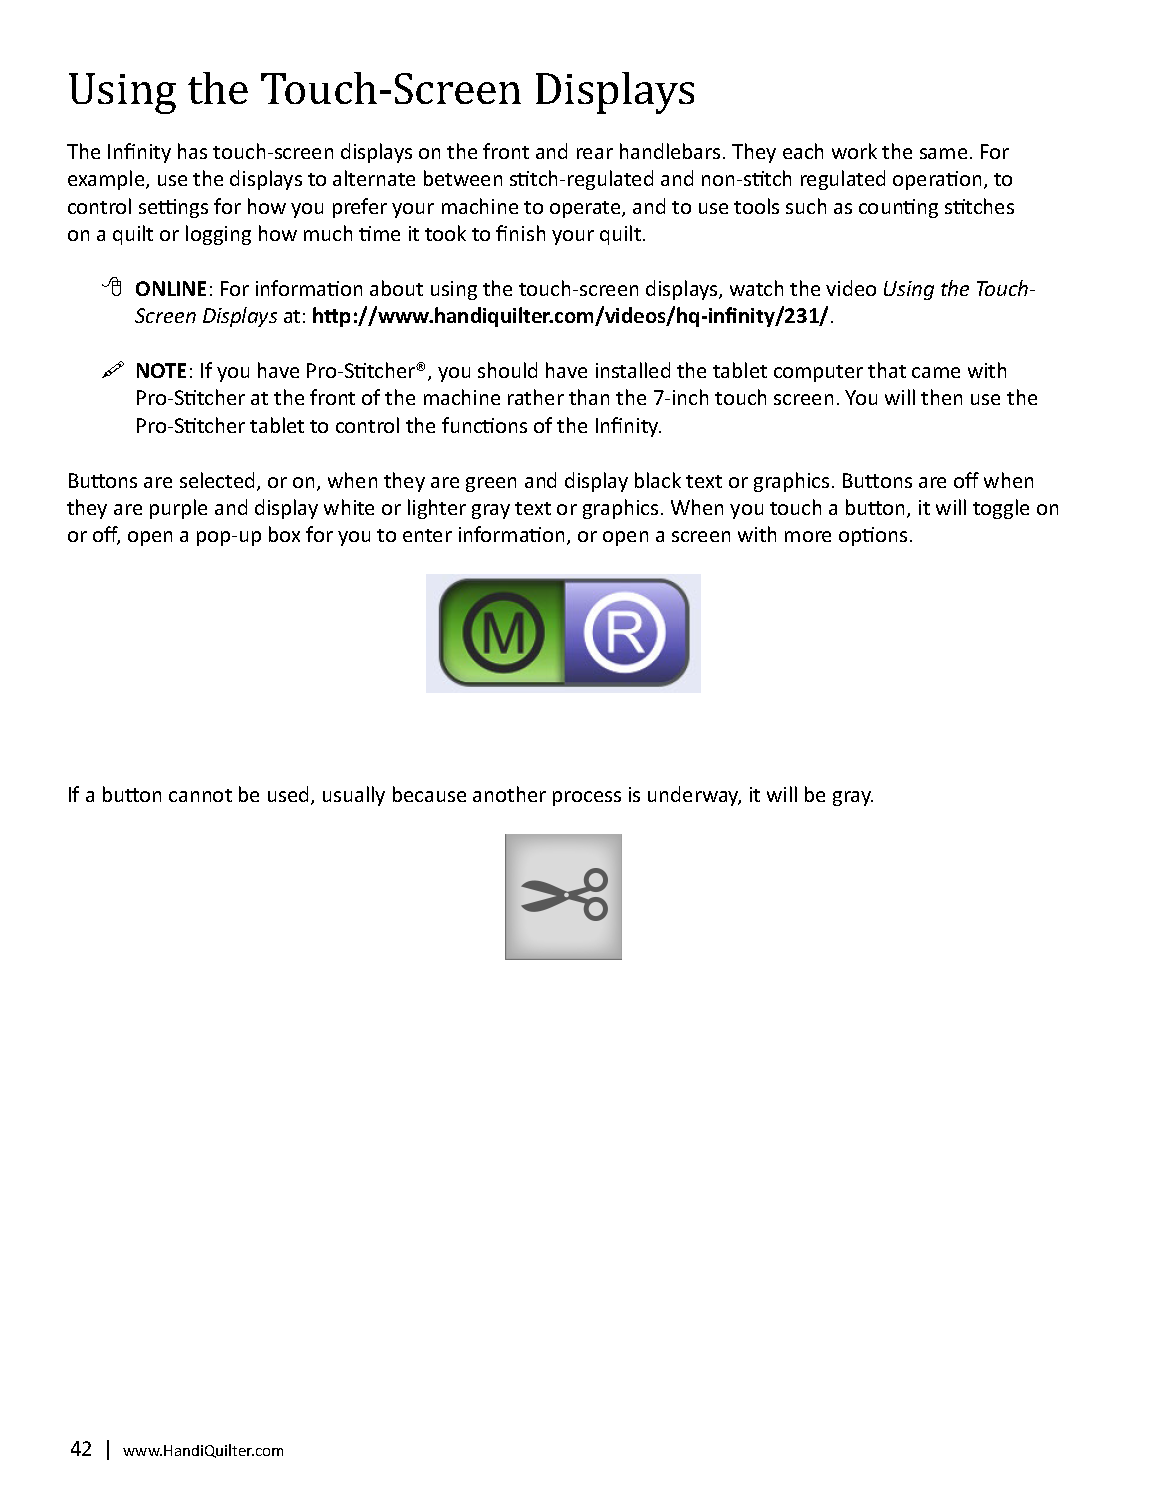 QM33001-HQ-Infinity-User-manual-version-1.4-ALL-Web-1_Page_43.png